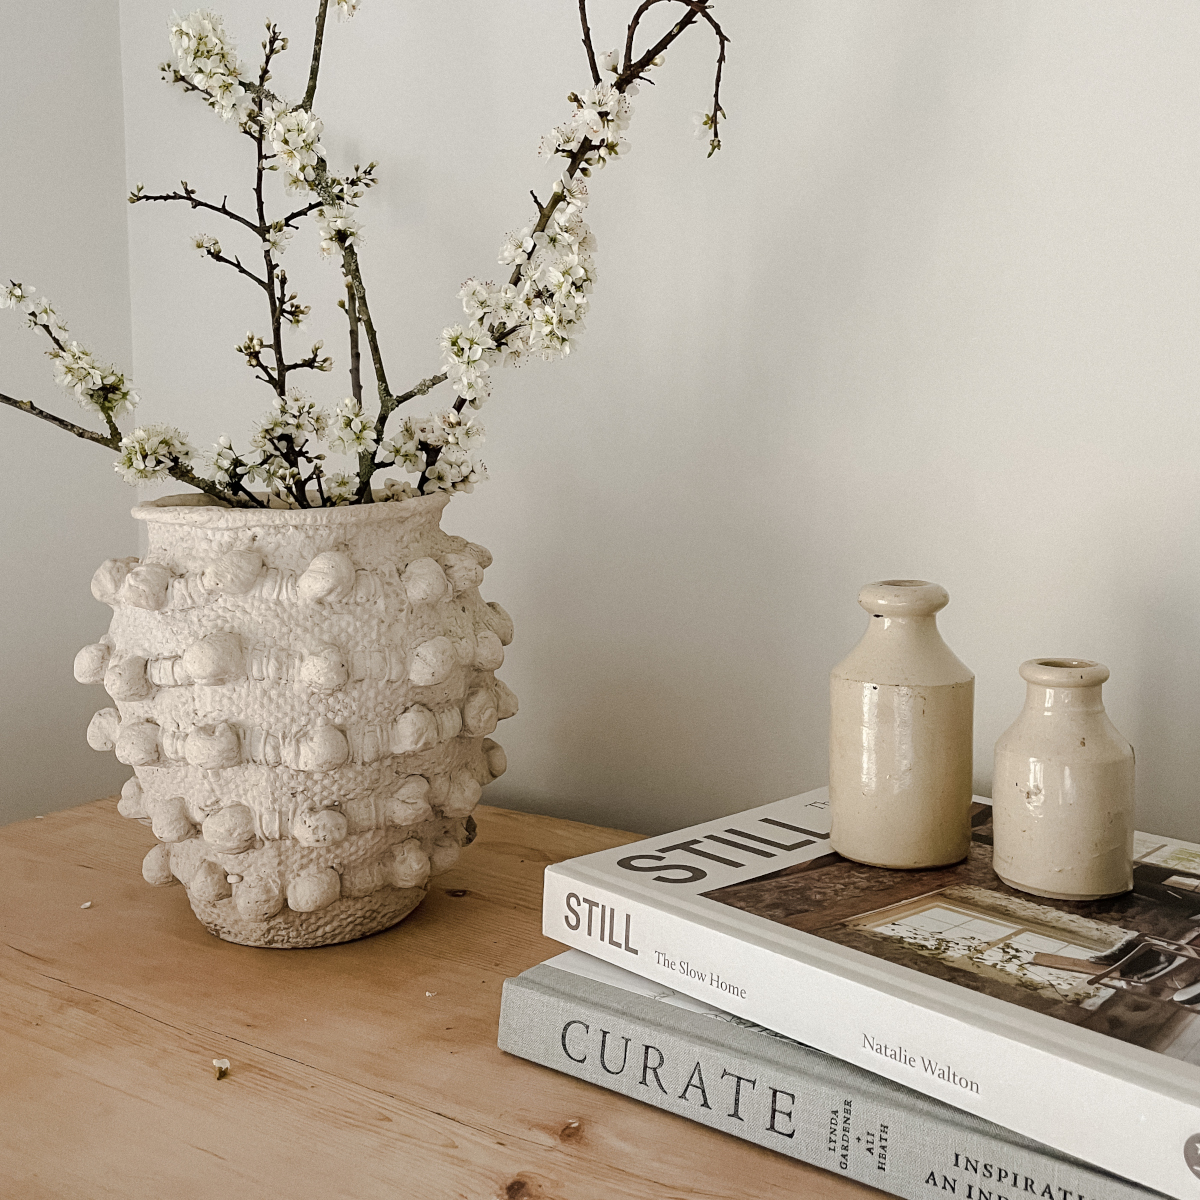 Vase of blossom and slow interiors books in a stack